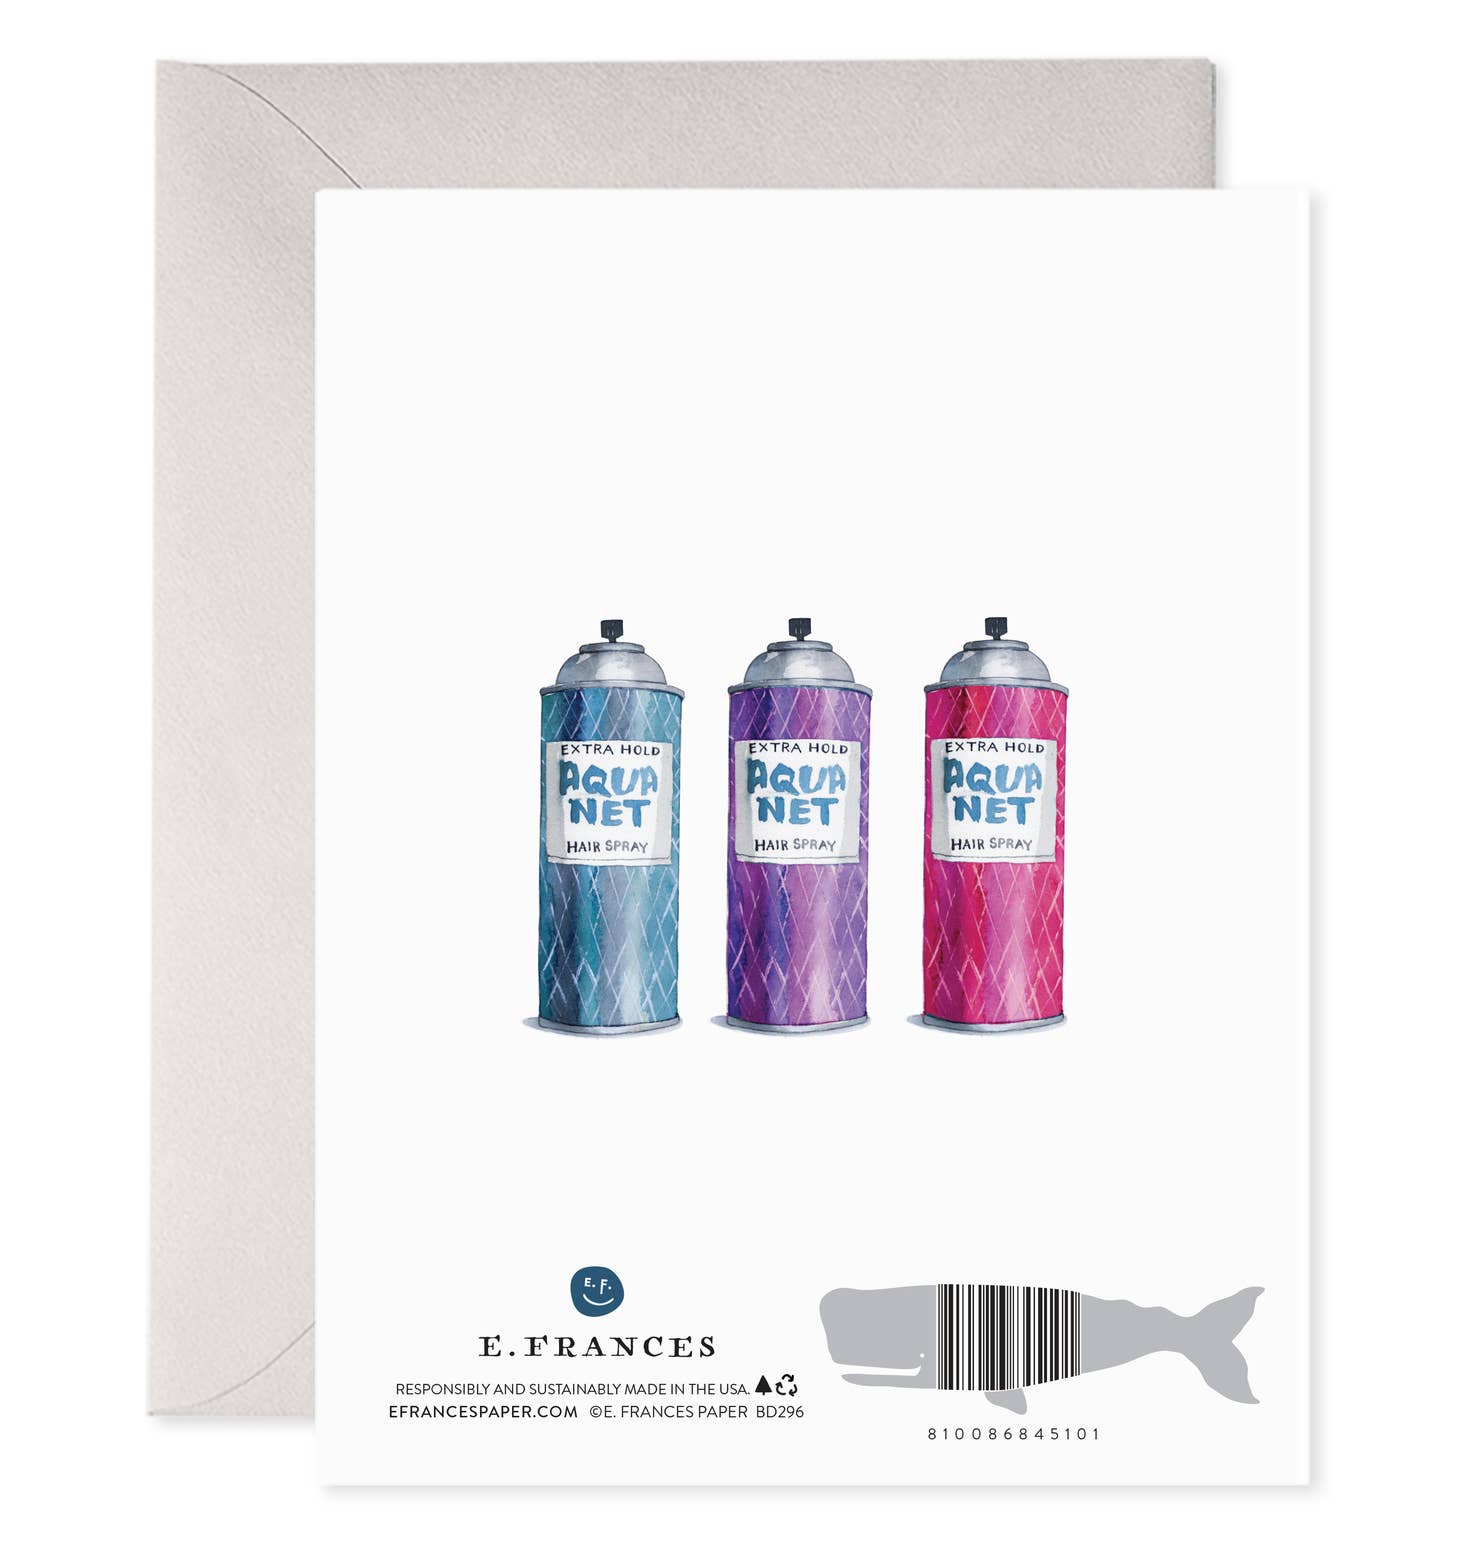 White background with images of blue, purple and pink cans of Aquanet extra hold hairspray. Grey envelope included. 